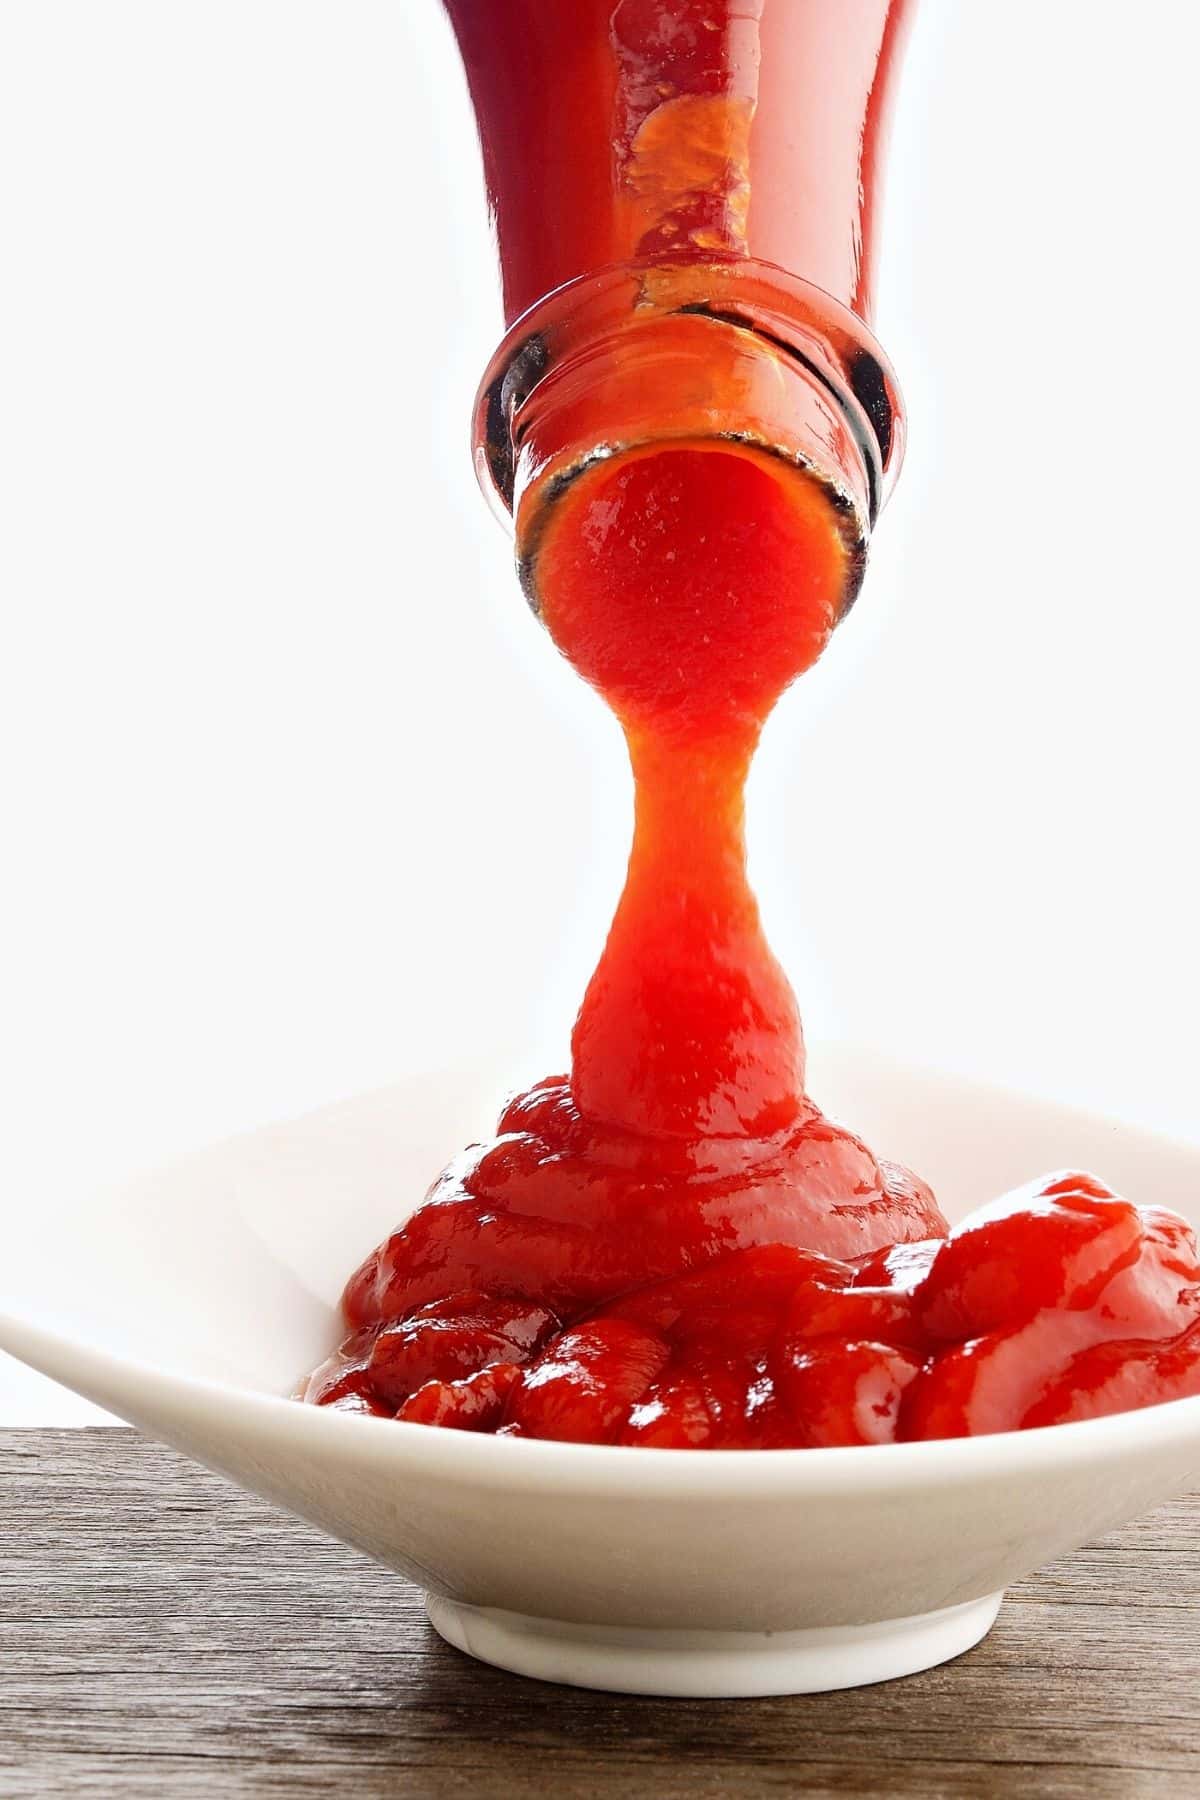 Pouring ketchup into a dish.